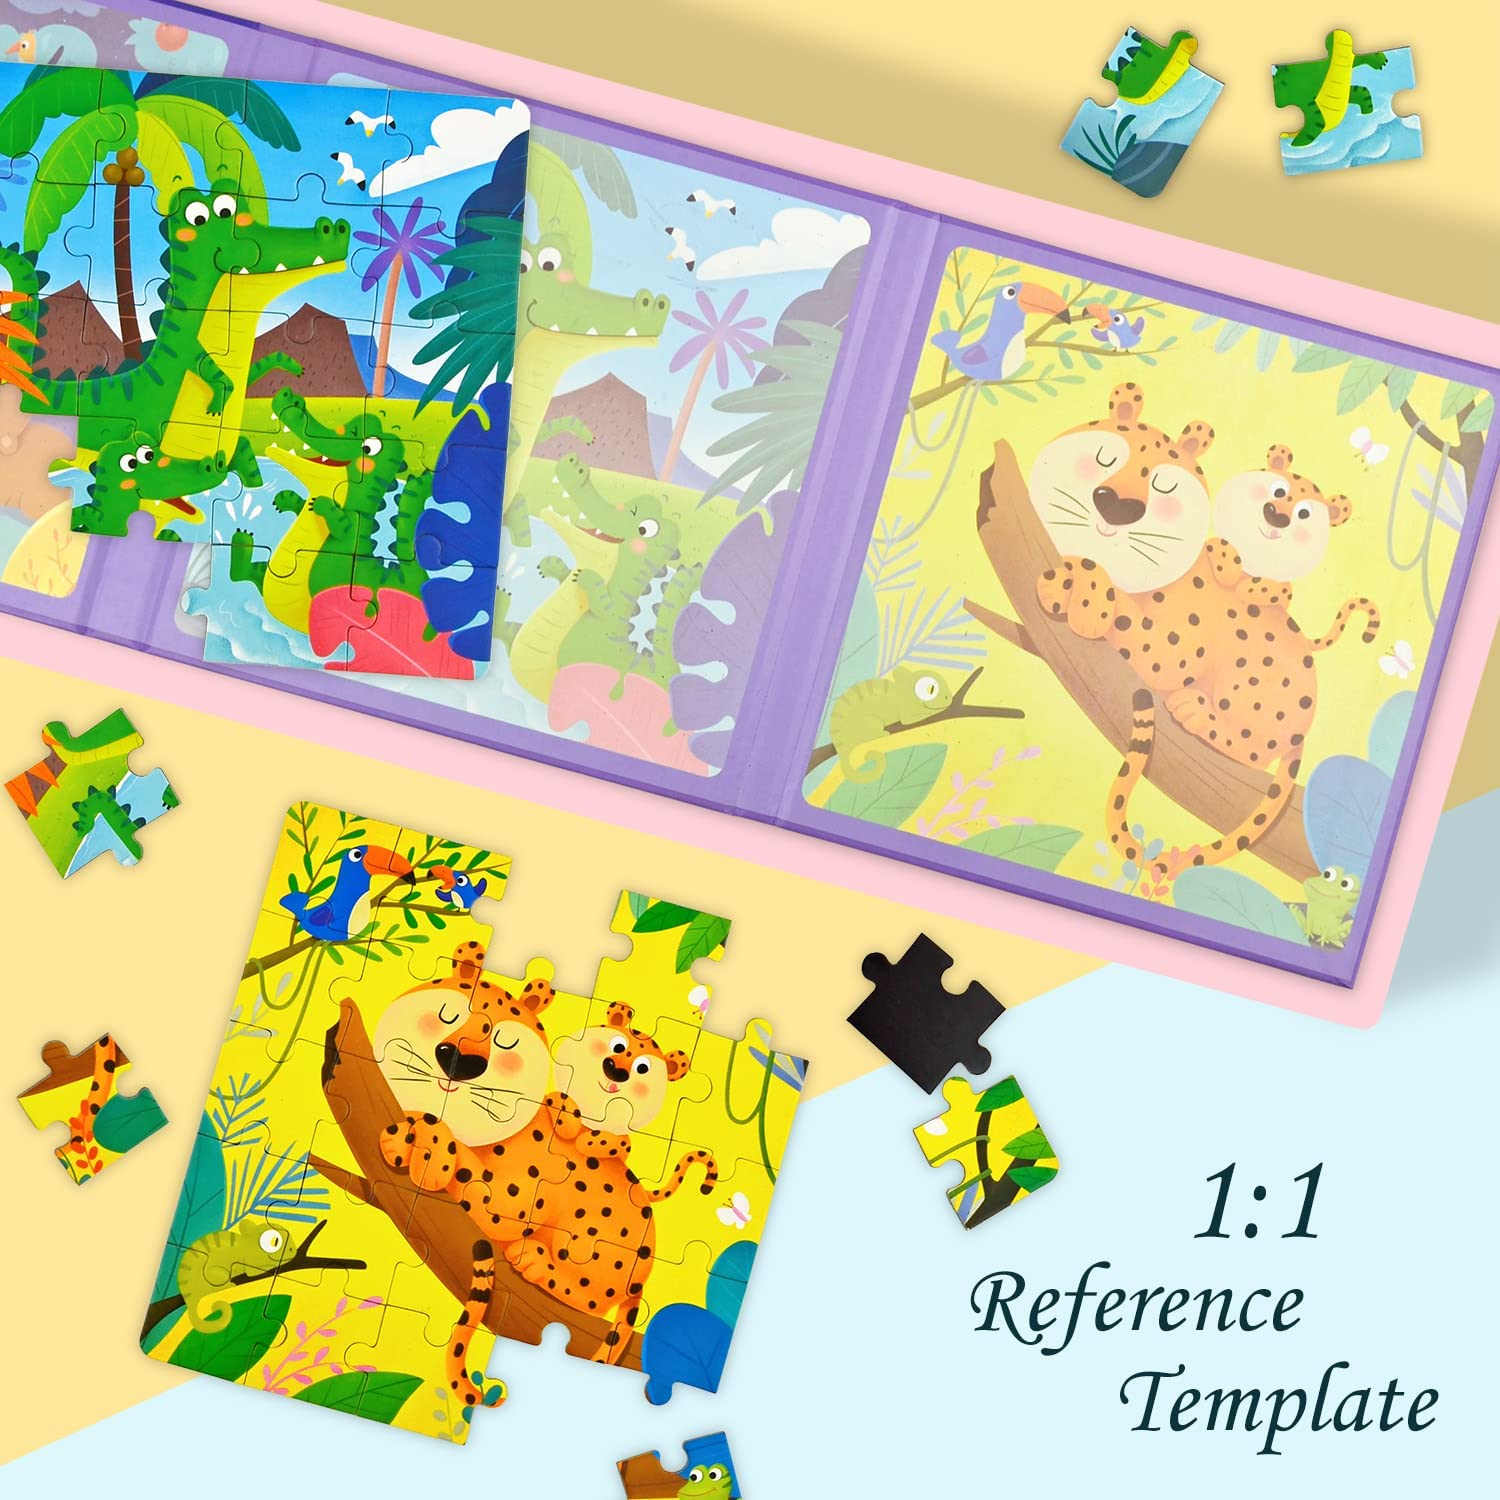 BUY 2 GET 10% OFF & FREE SHIPPING--3-in-1 Magnetic Jigsaw Puzzle Book (Suitable for 3 to 77 years old)